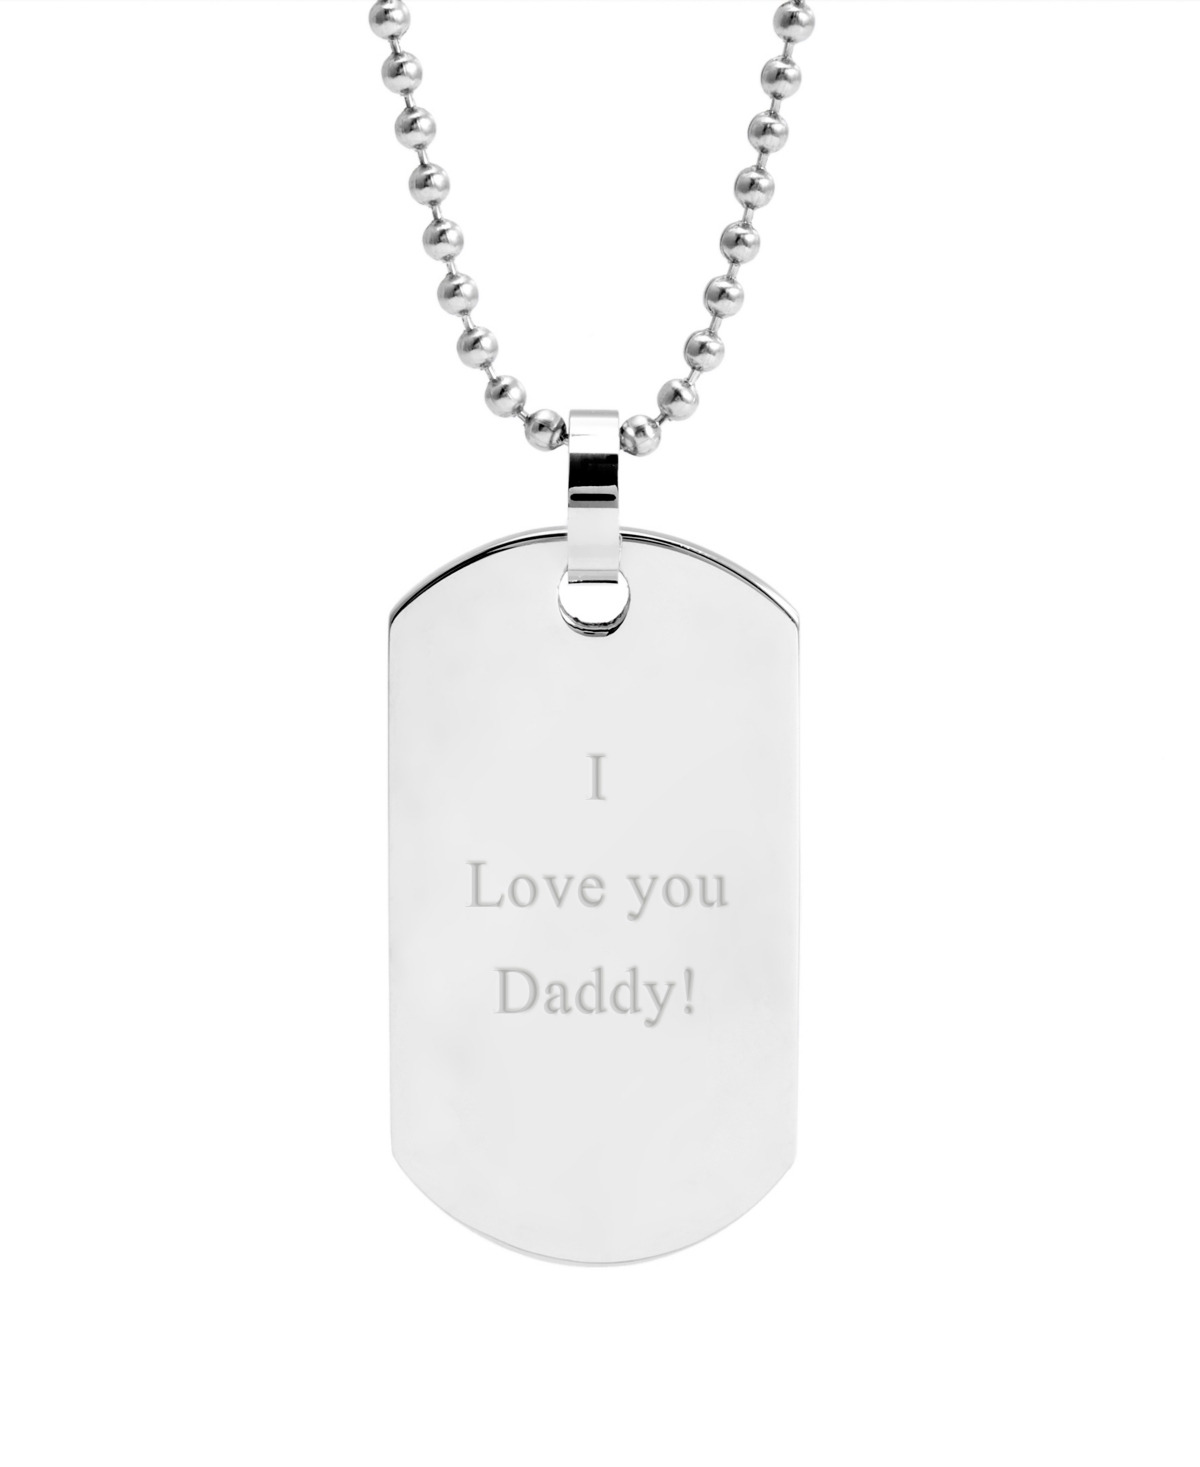 Eve's Jewelry Men's Large Stainless Steel "I Love You Daddy" Dog Tag Necklace